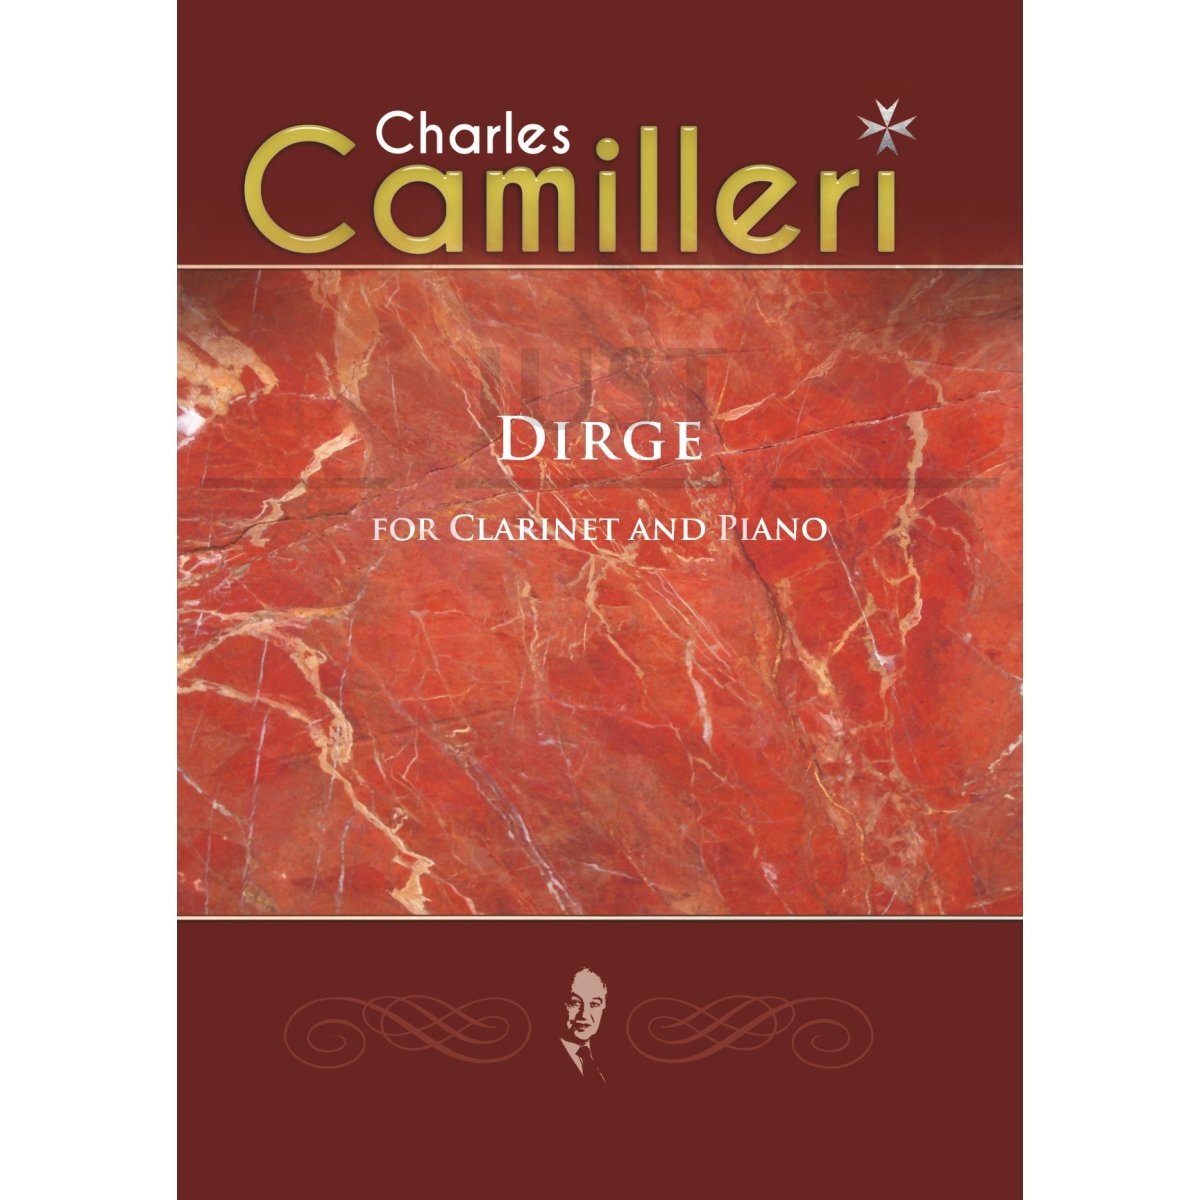 Dirge 11.09.01 for Clarinet and Piano